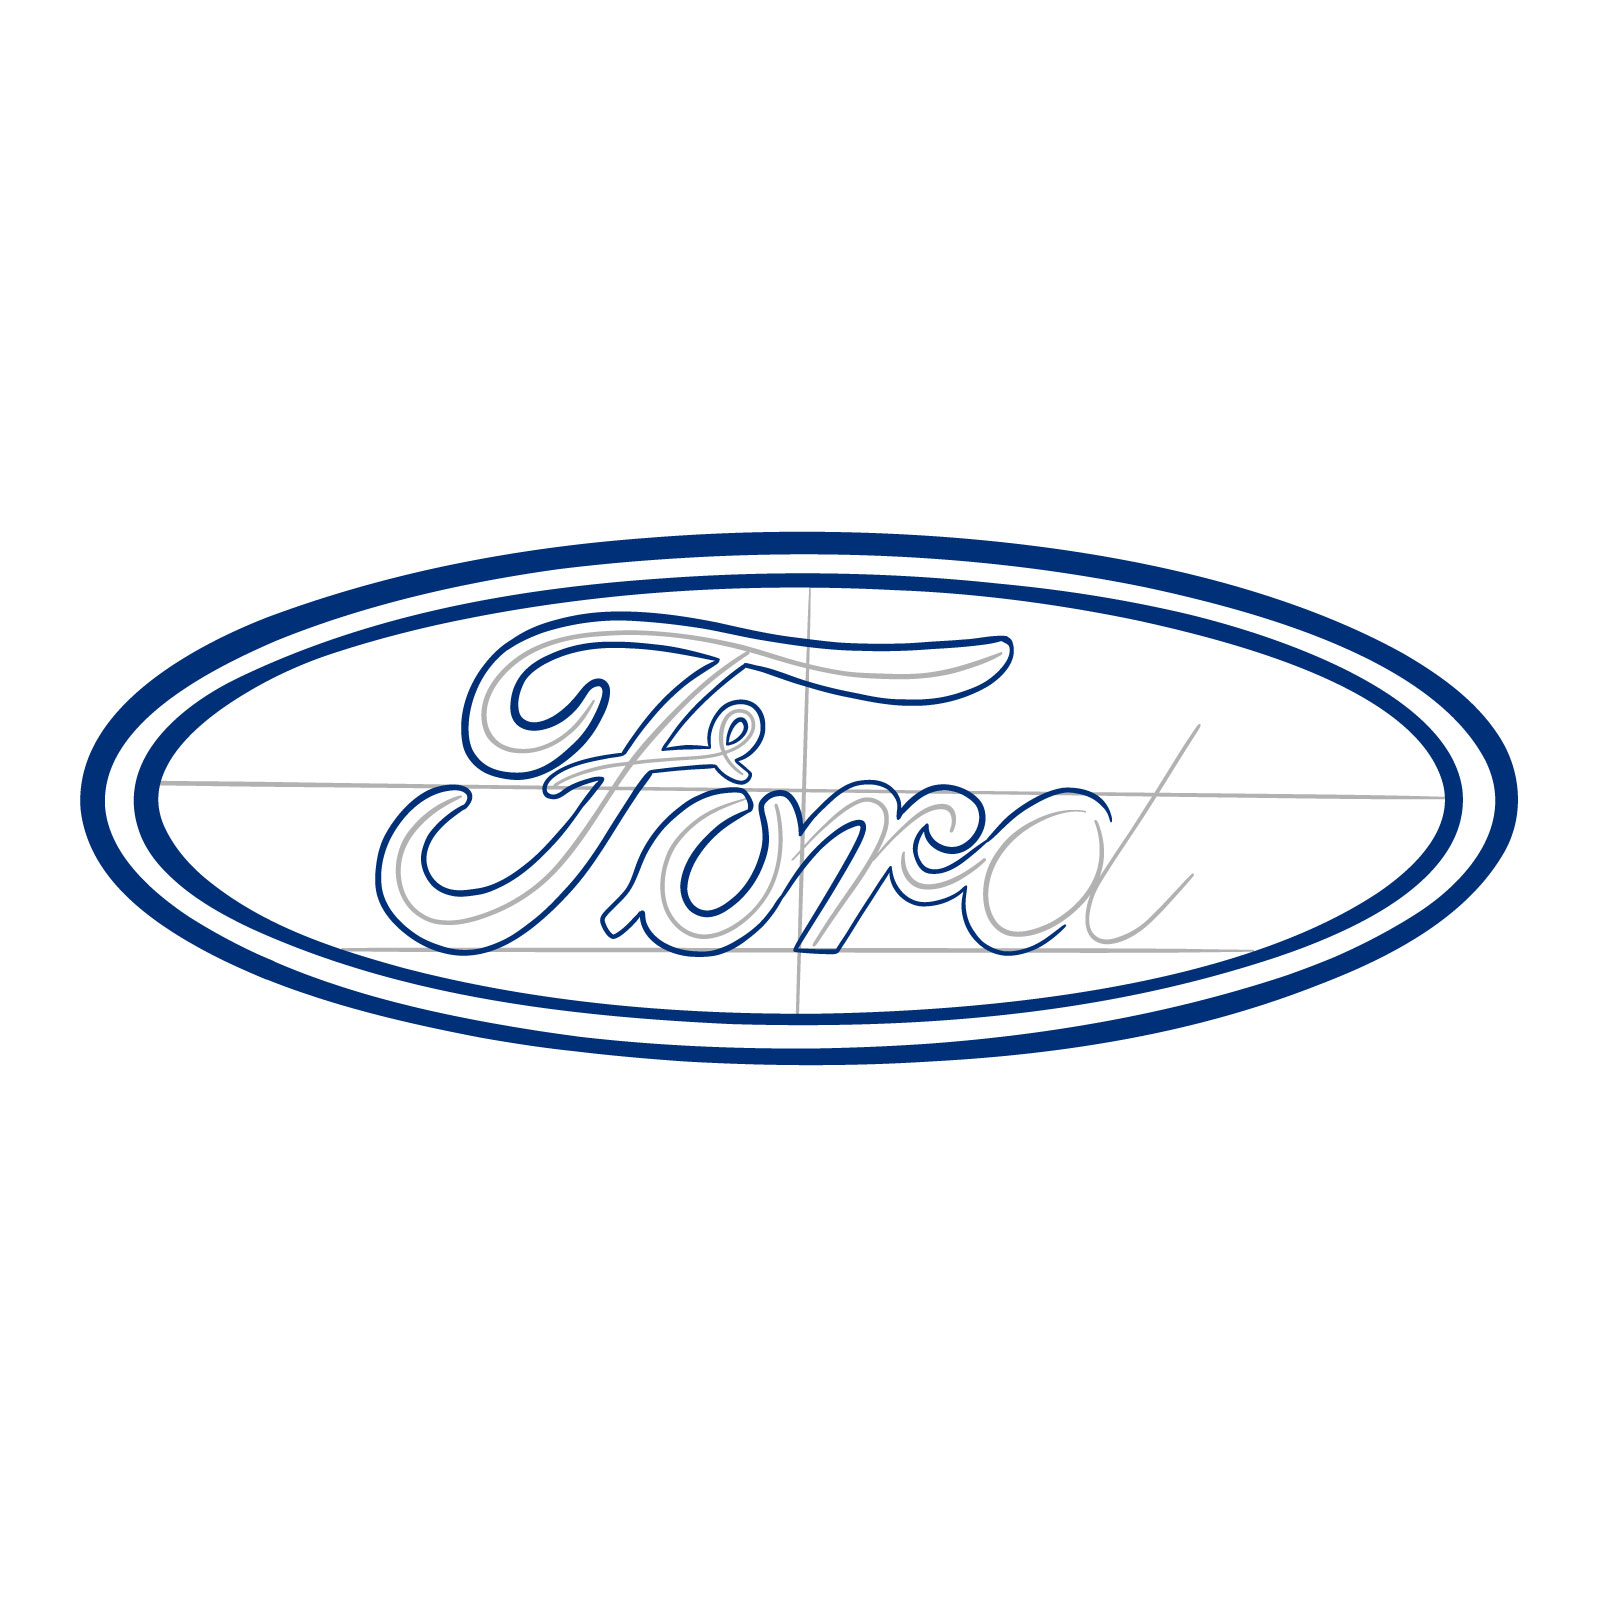 How to draw the Ford logo - step 12